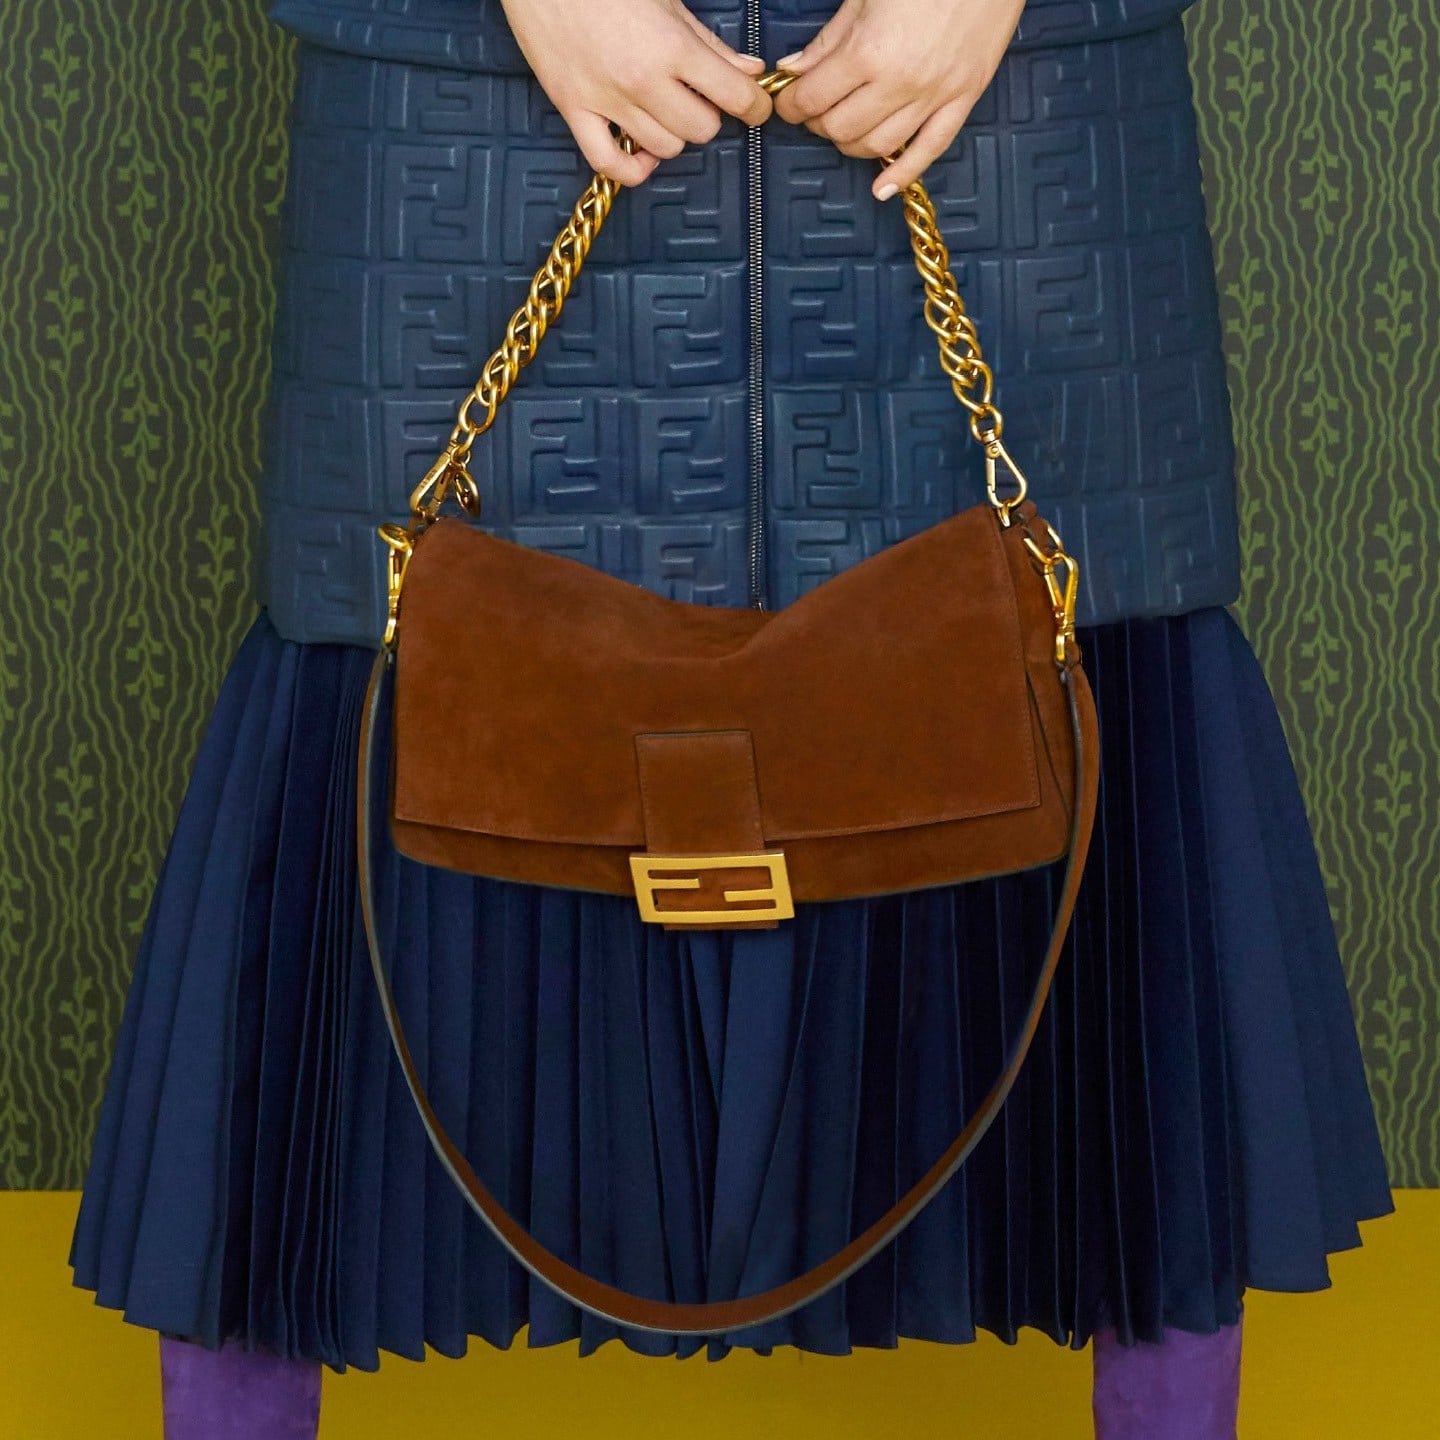 Fendi Pre-Fall 2019 Bag Collection Features Suede and Beaded Bags | Spotted Fashion